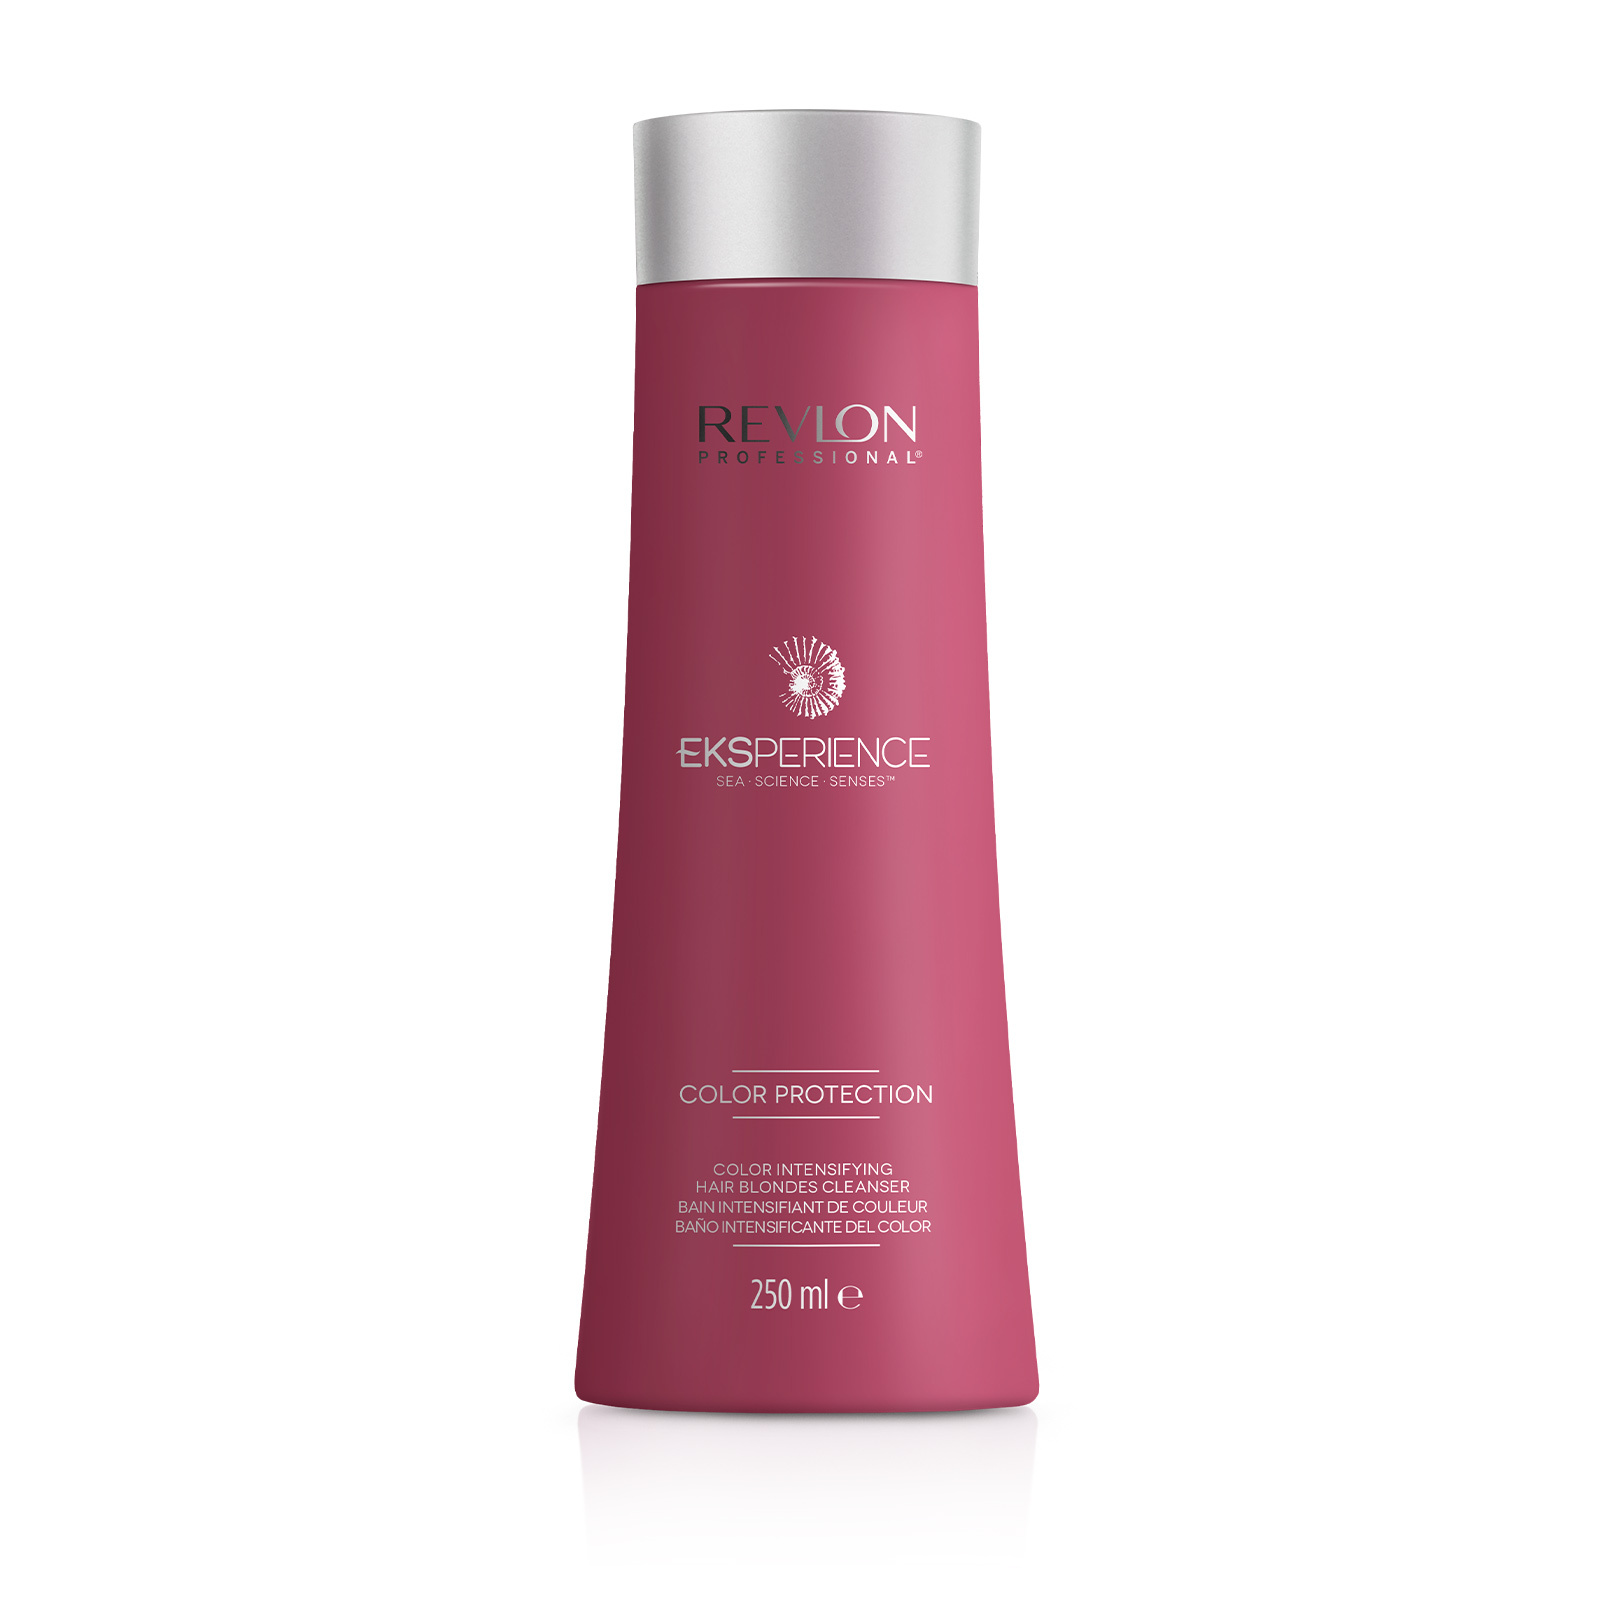 Eksperience Color Protection Color Intensifying Hair Cleanser